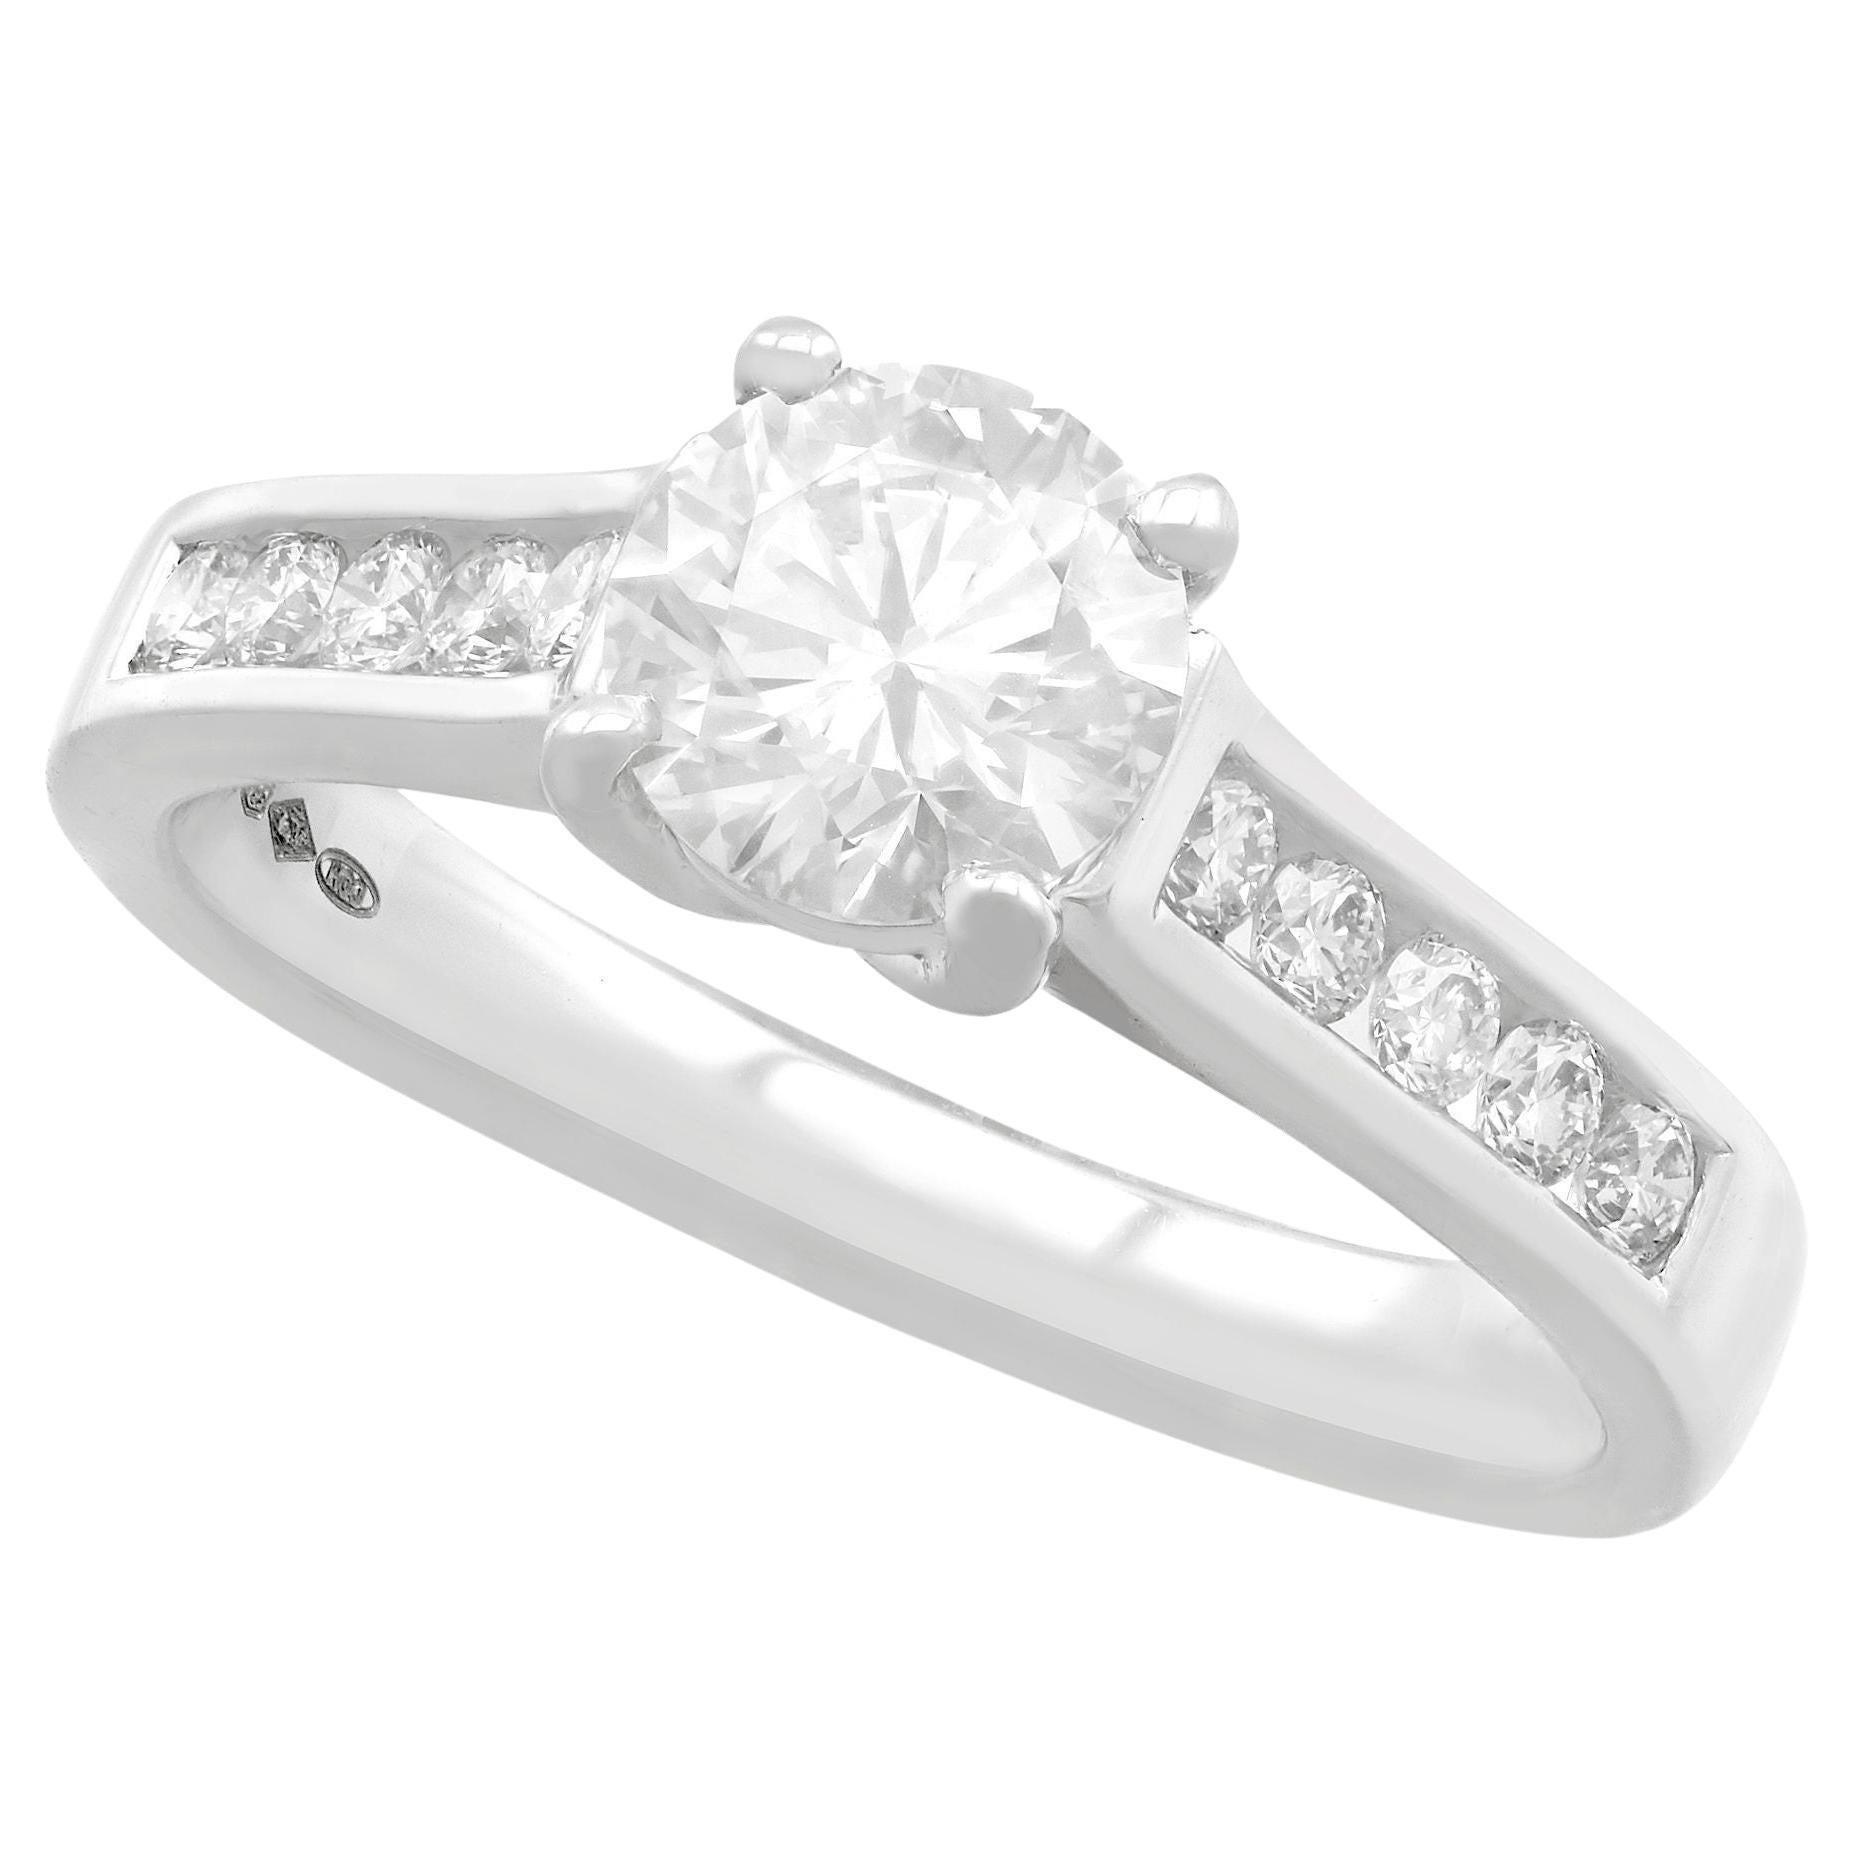 1.22 Carat Diamond and Platinum Solitaire Engagement Ring For Sale